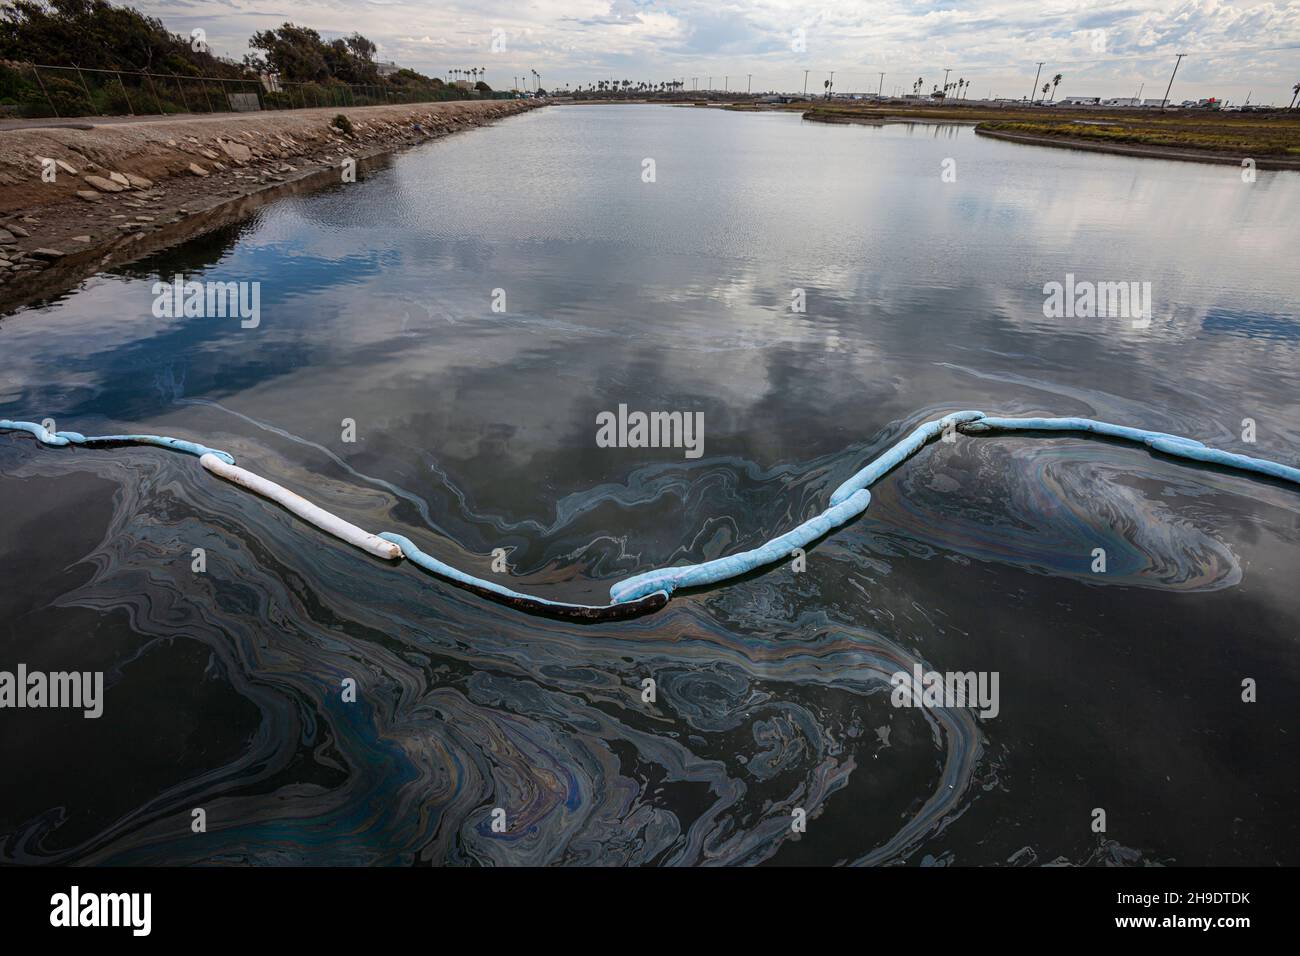 A boom blocks an oil slick in the Talbert Marsh near Huntington State Beach. An estimated 127,000 gallons of crude oil leaked from an oil derrick pipe Stock Photo